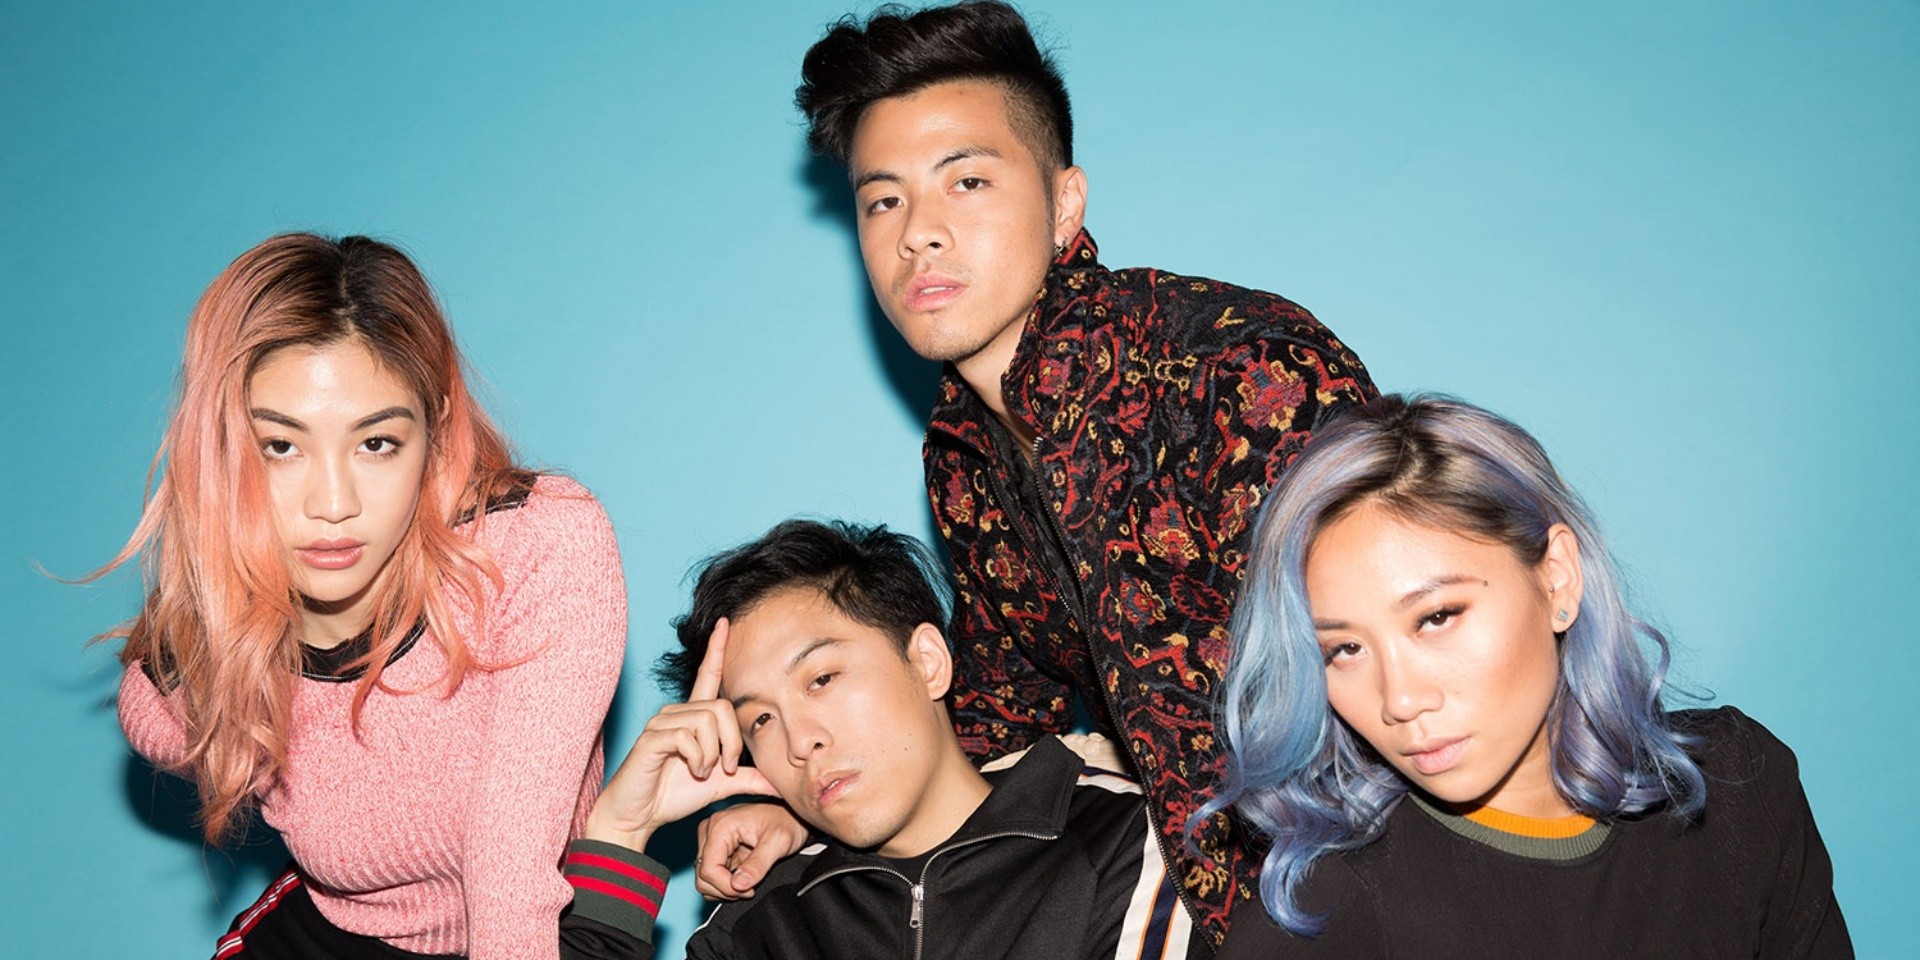 The Sam Willows to perform at AIA Glow Festival 2019